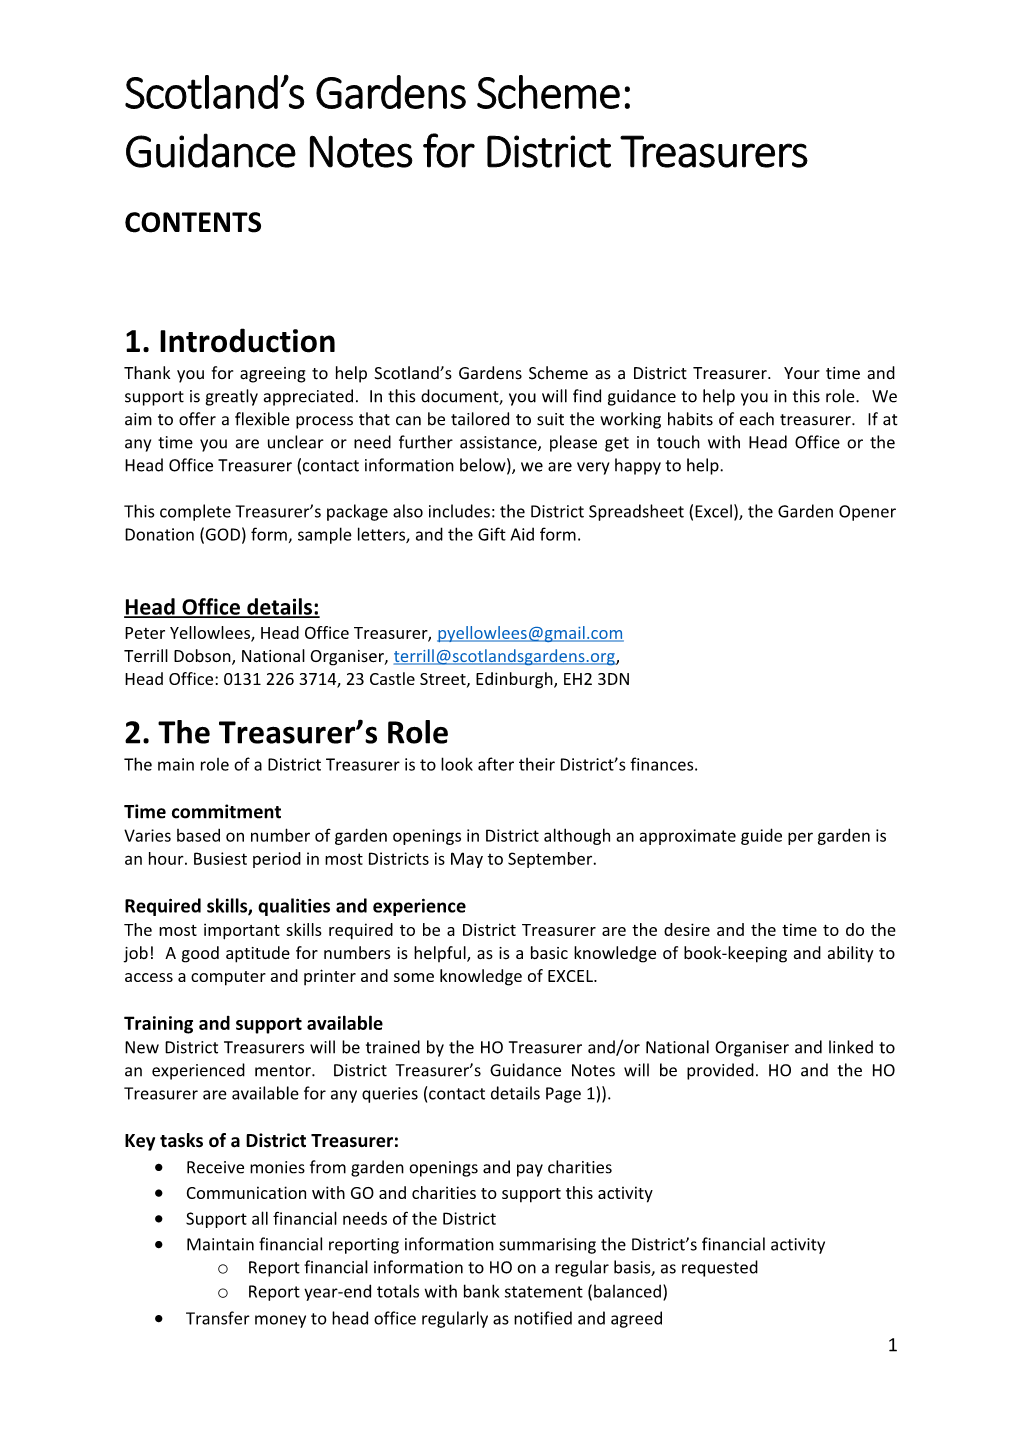 Guidance Notes for District Treasurers